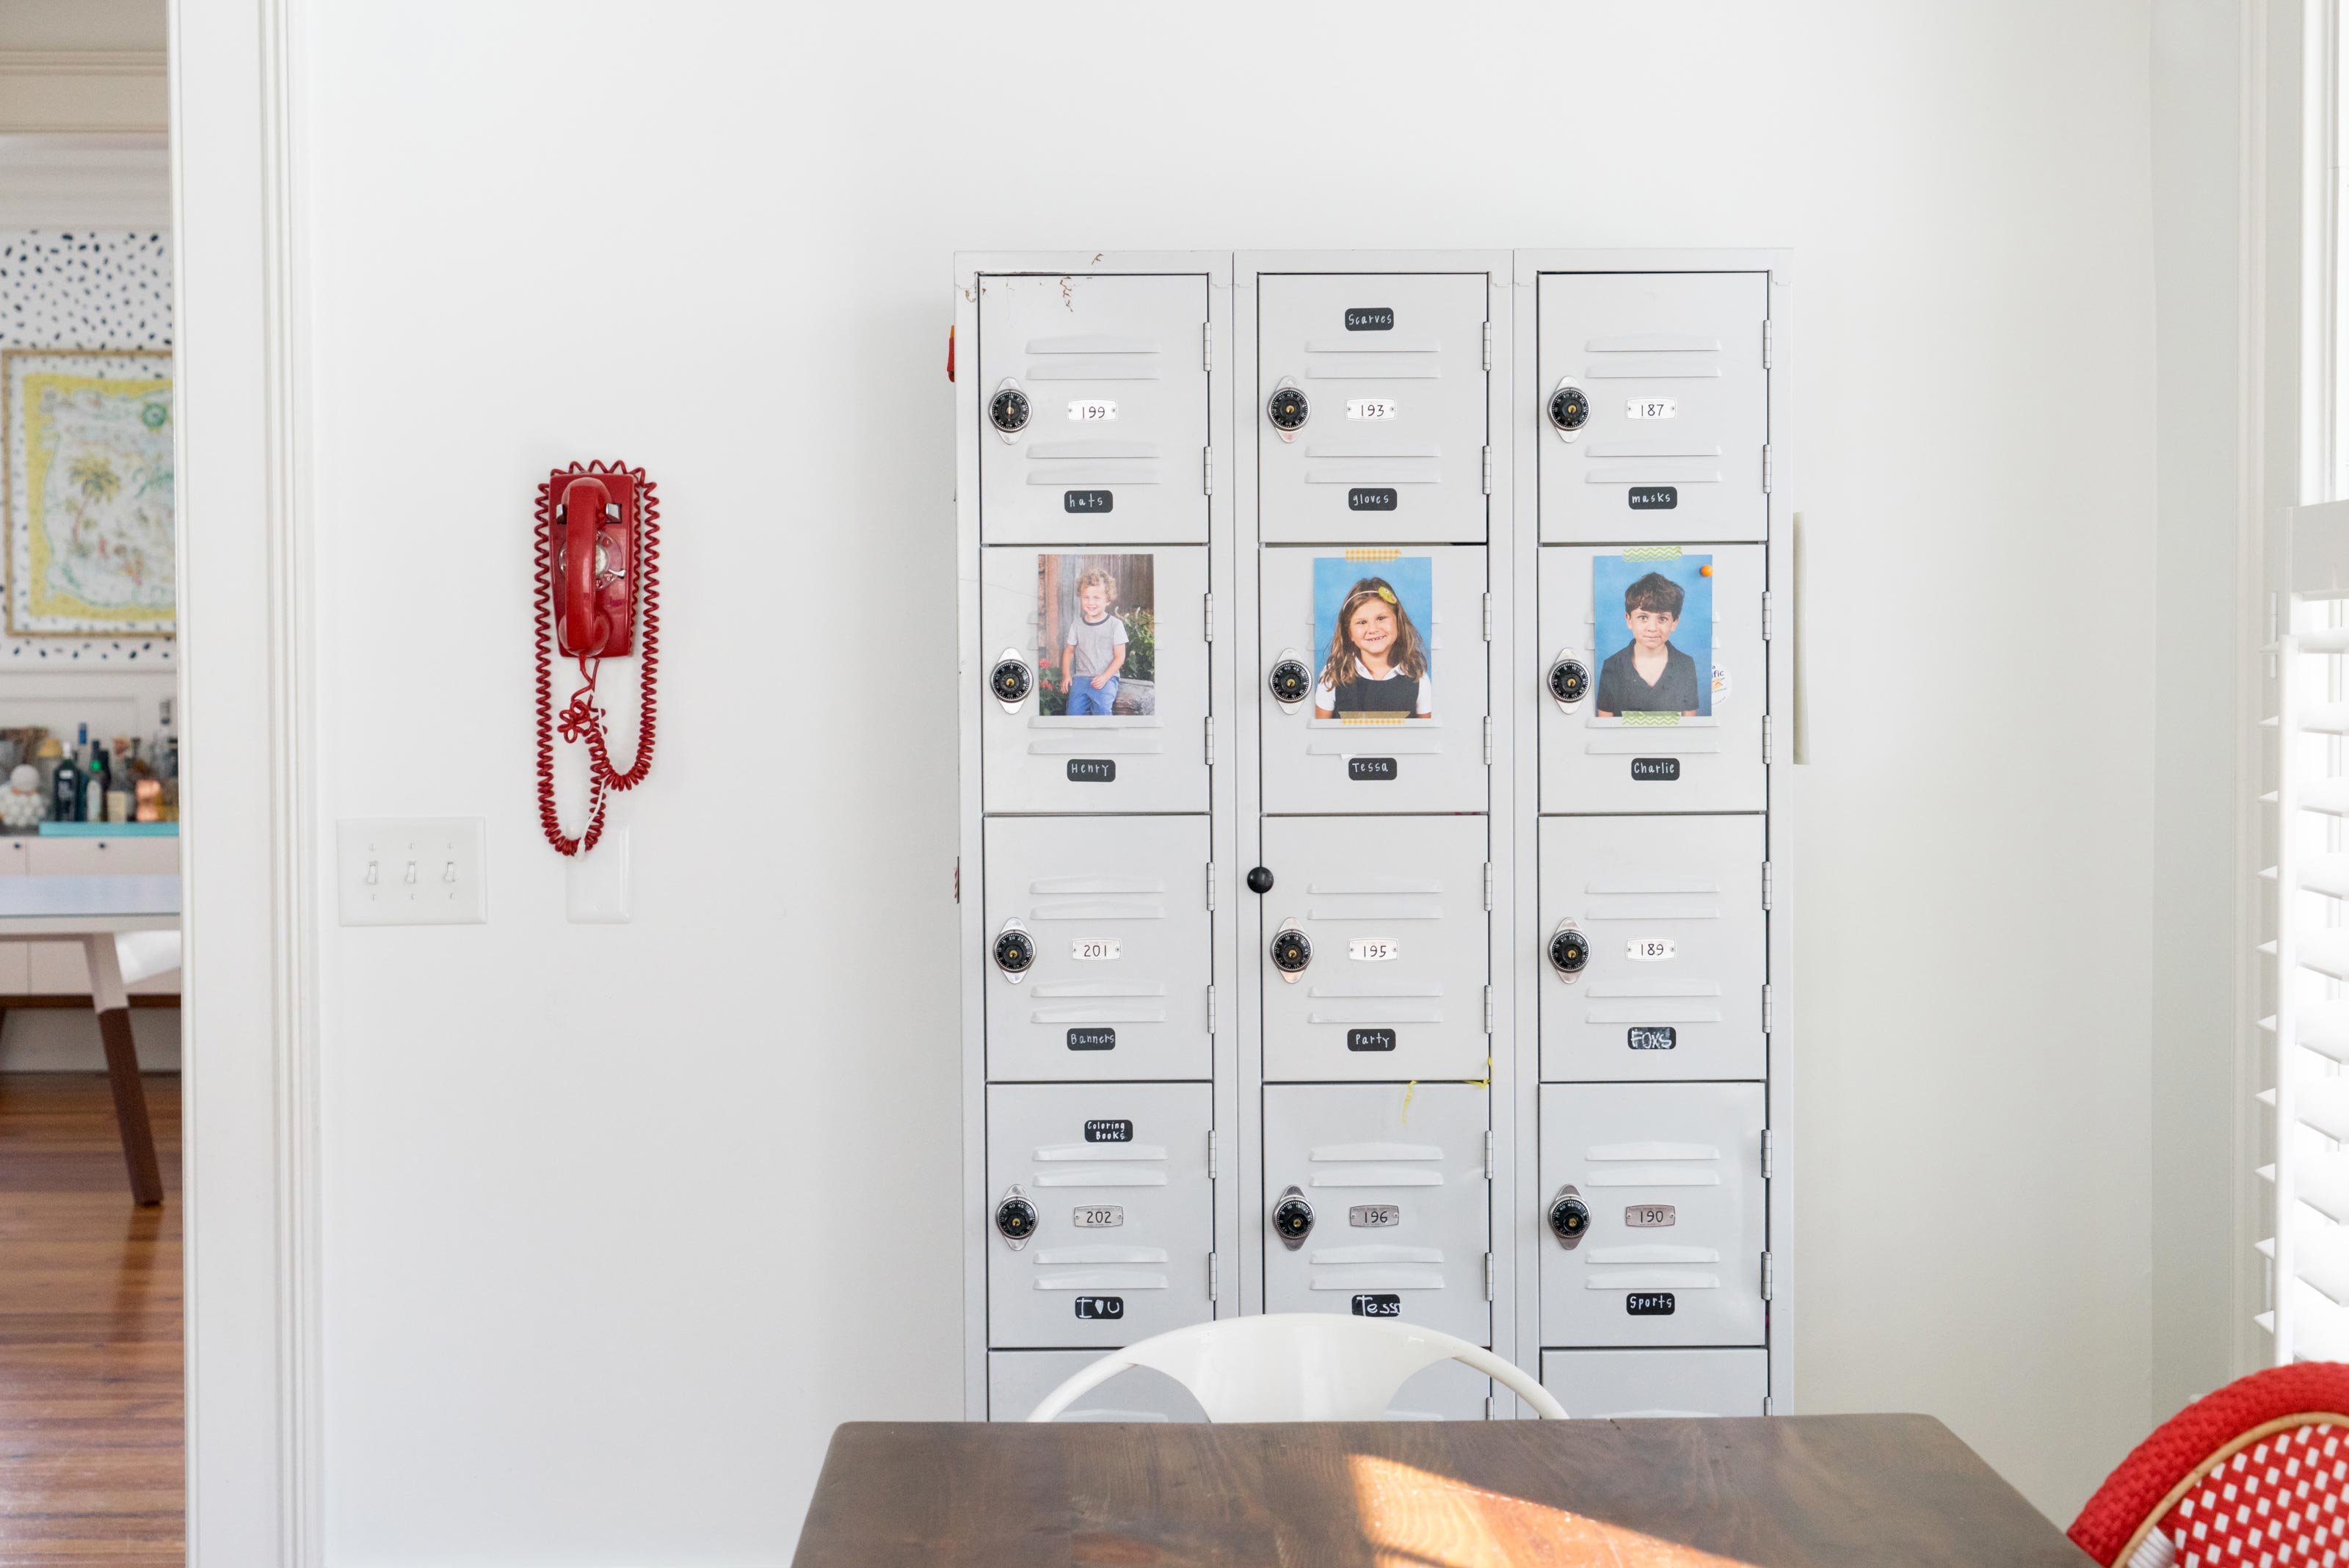 3 rows of lockers and a vintage red phone in a dining room